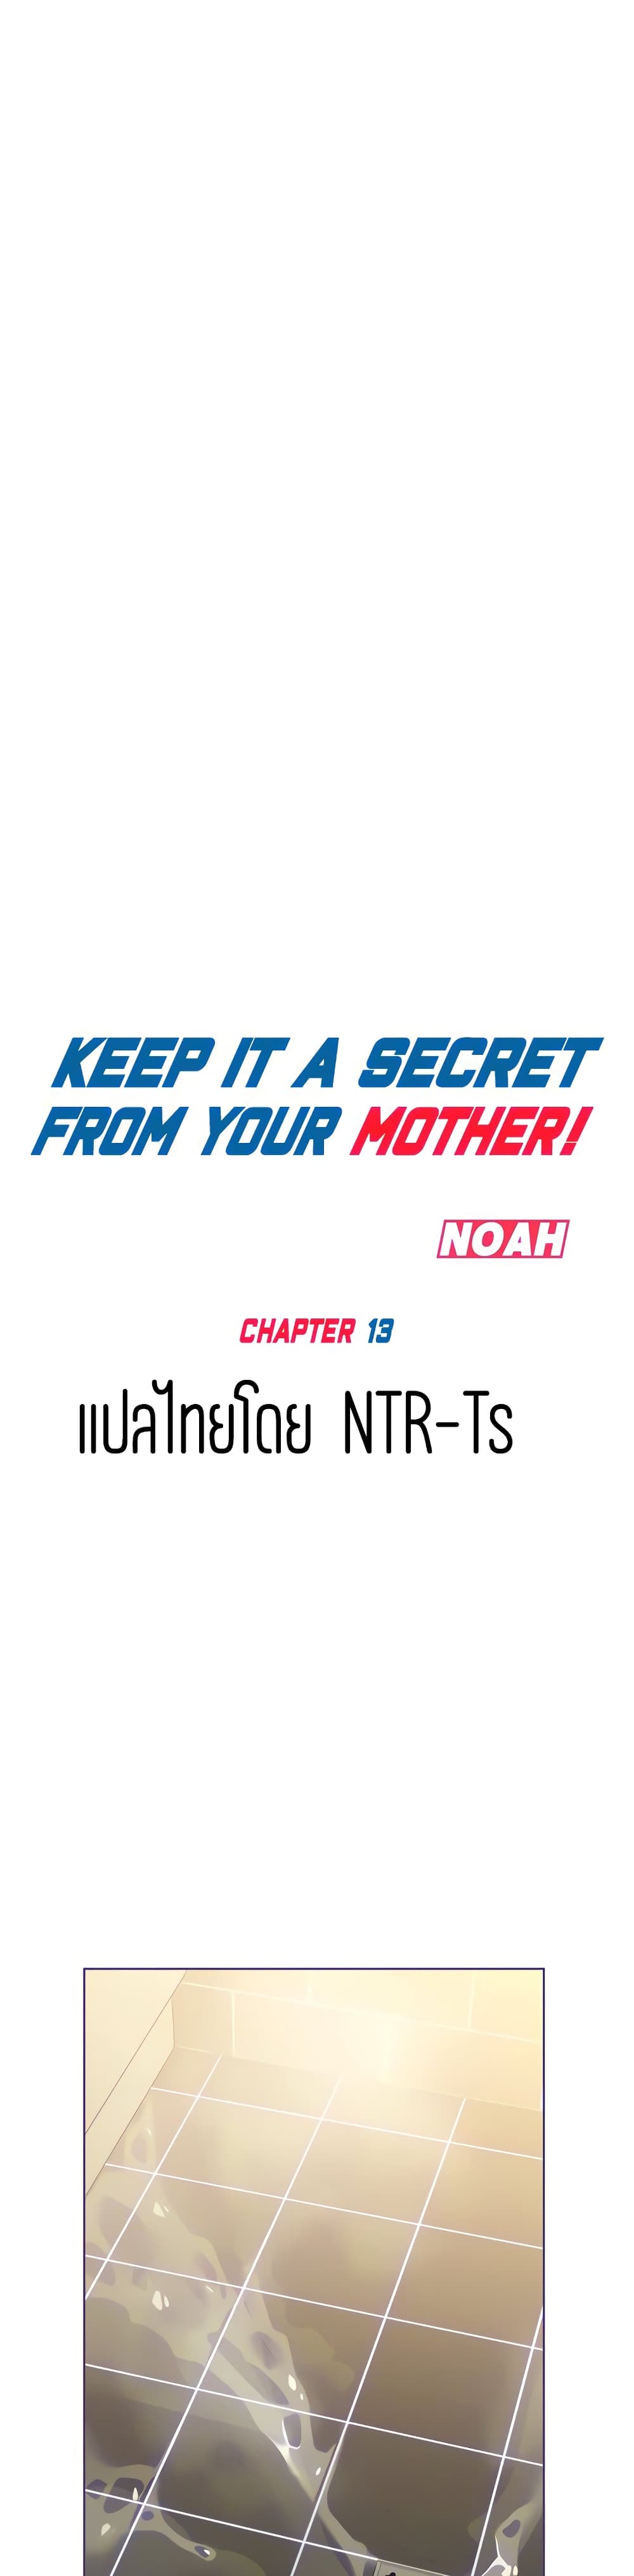 Keep it A Secret from Your Mother 13 (21)